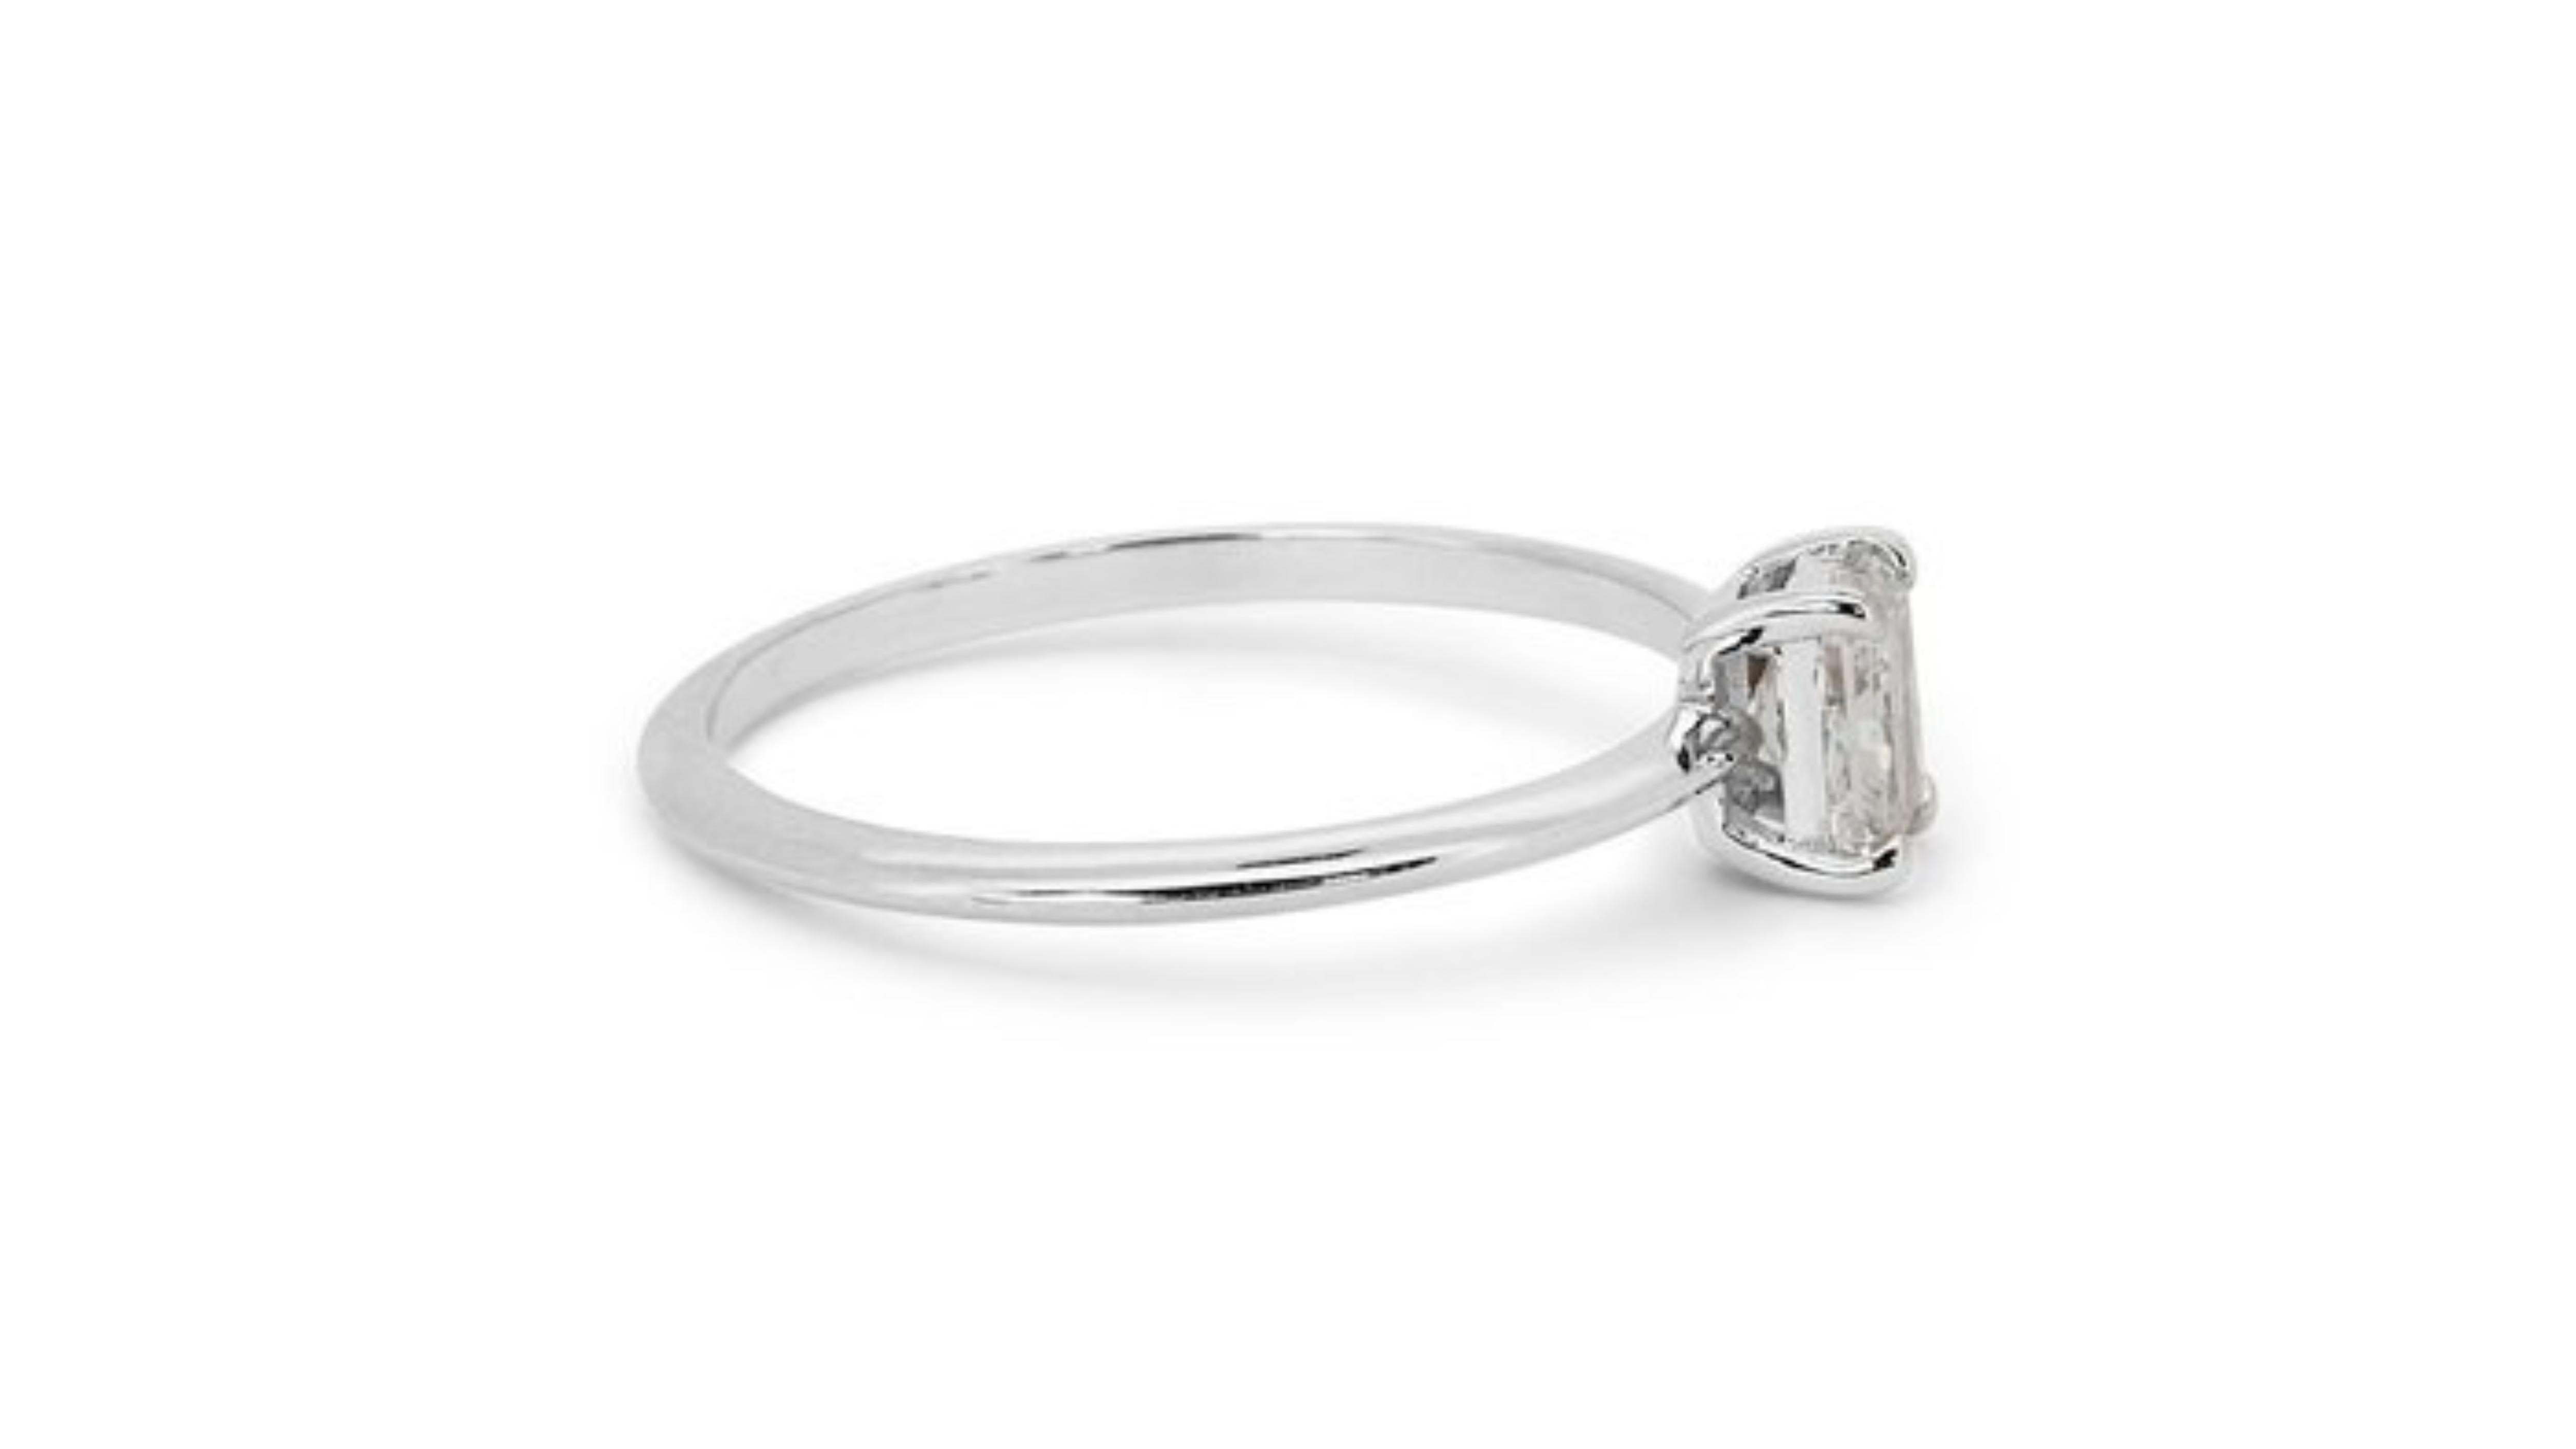 Sparkling solitaire ring with a dazzling 0.80-carat radiant natural diamond 1